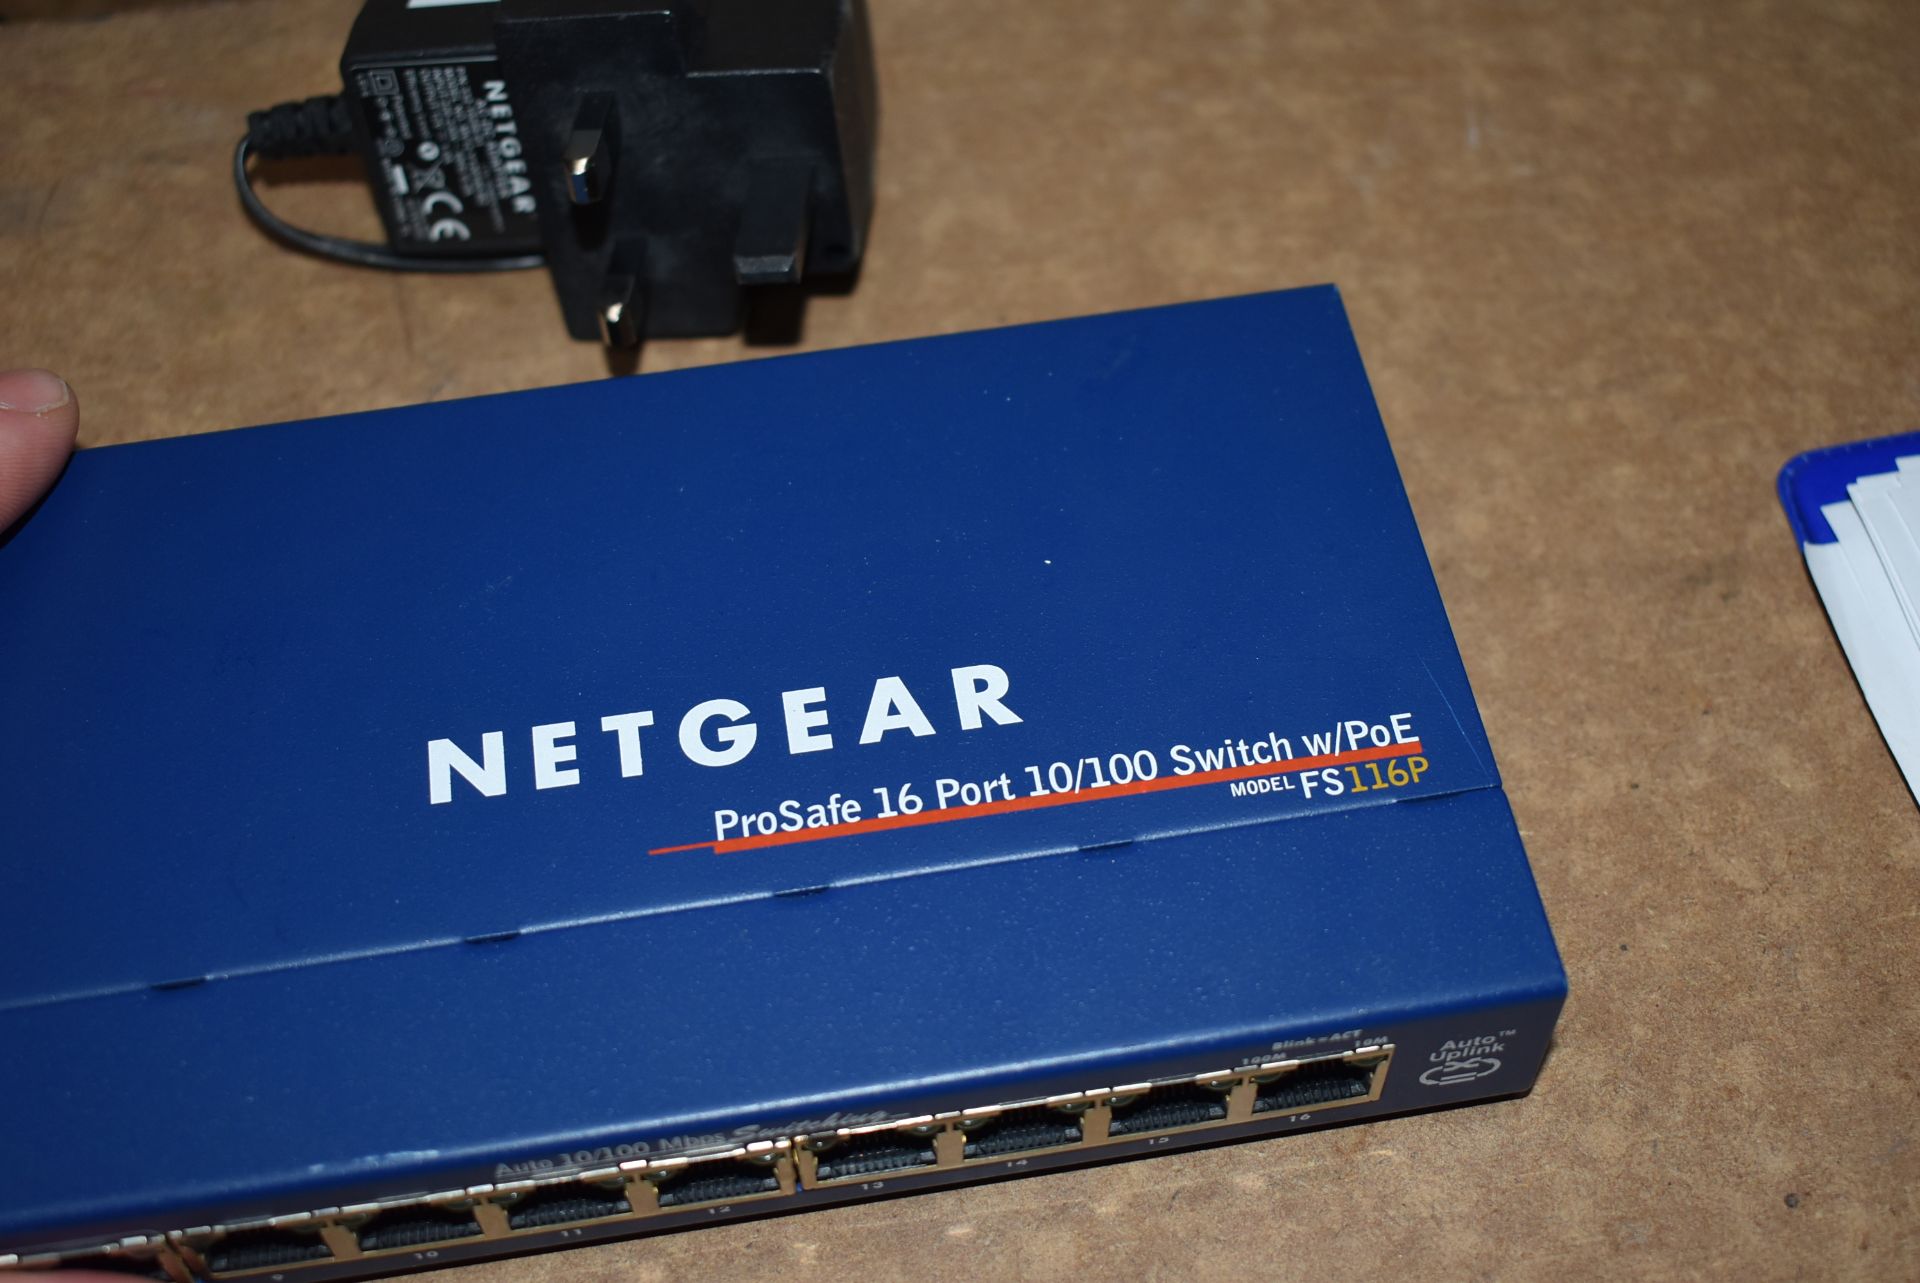 1 x Netgear ProSafe 16 Port 10/100 Network Switch With PoE - Type FS116P - Includes Power Cable - - Image 4 of 5